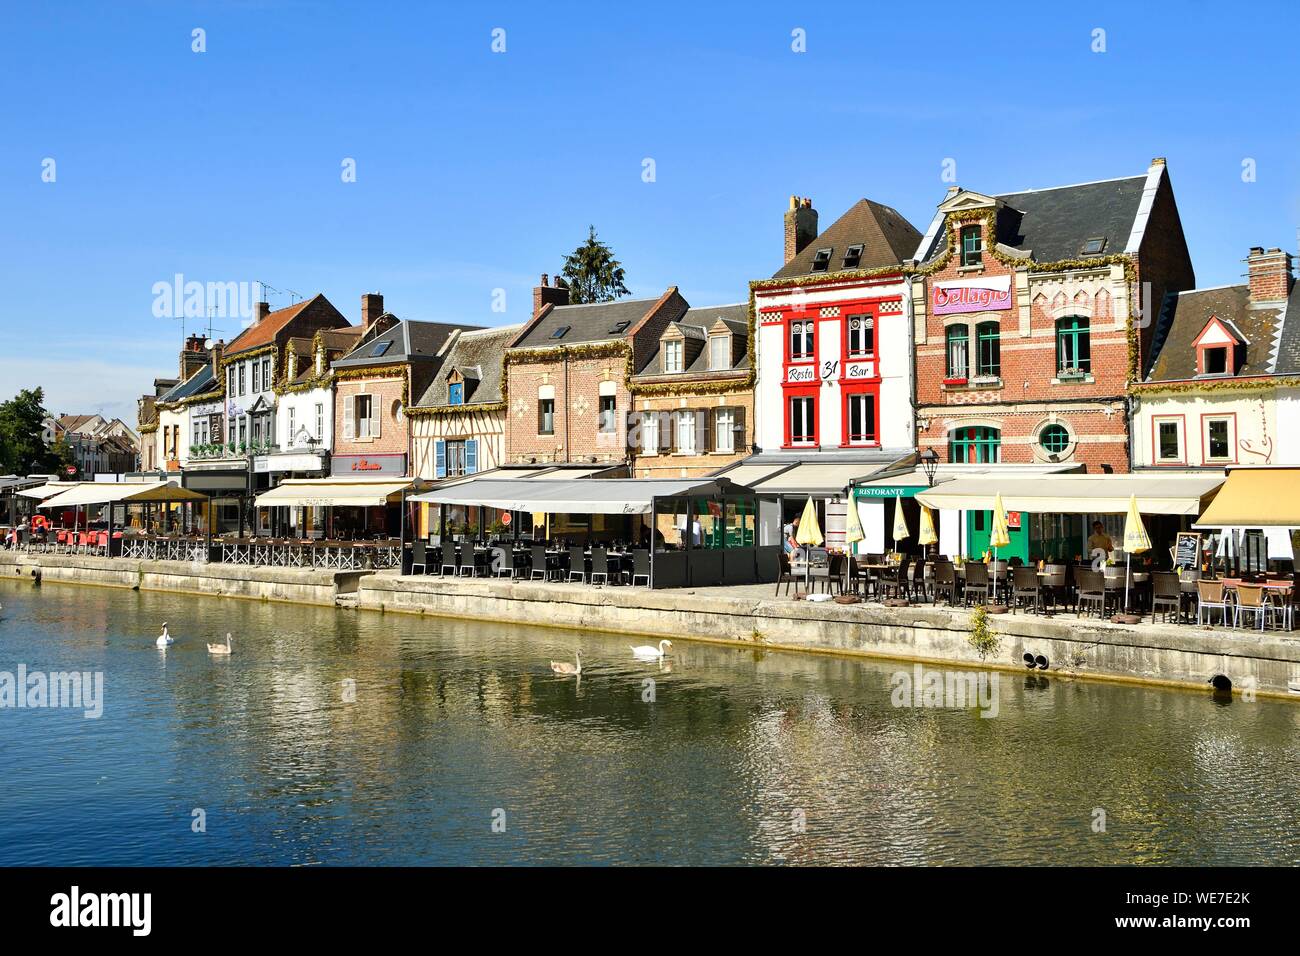 France, Somme, Amiens, Saint-Leu district, Quai Belu on the banks of the Somme river Stock Photo